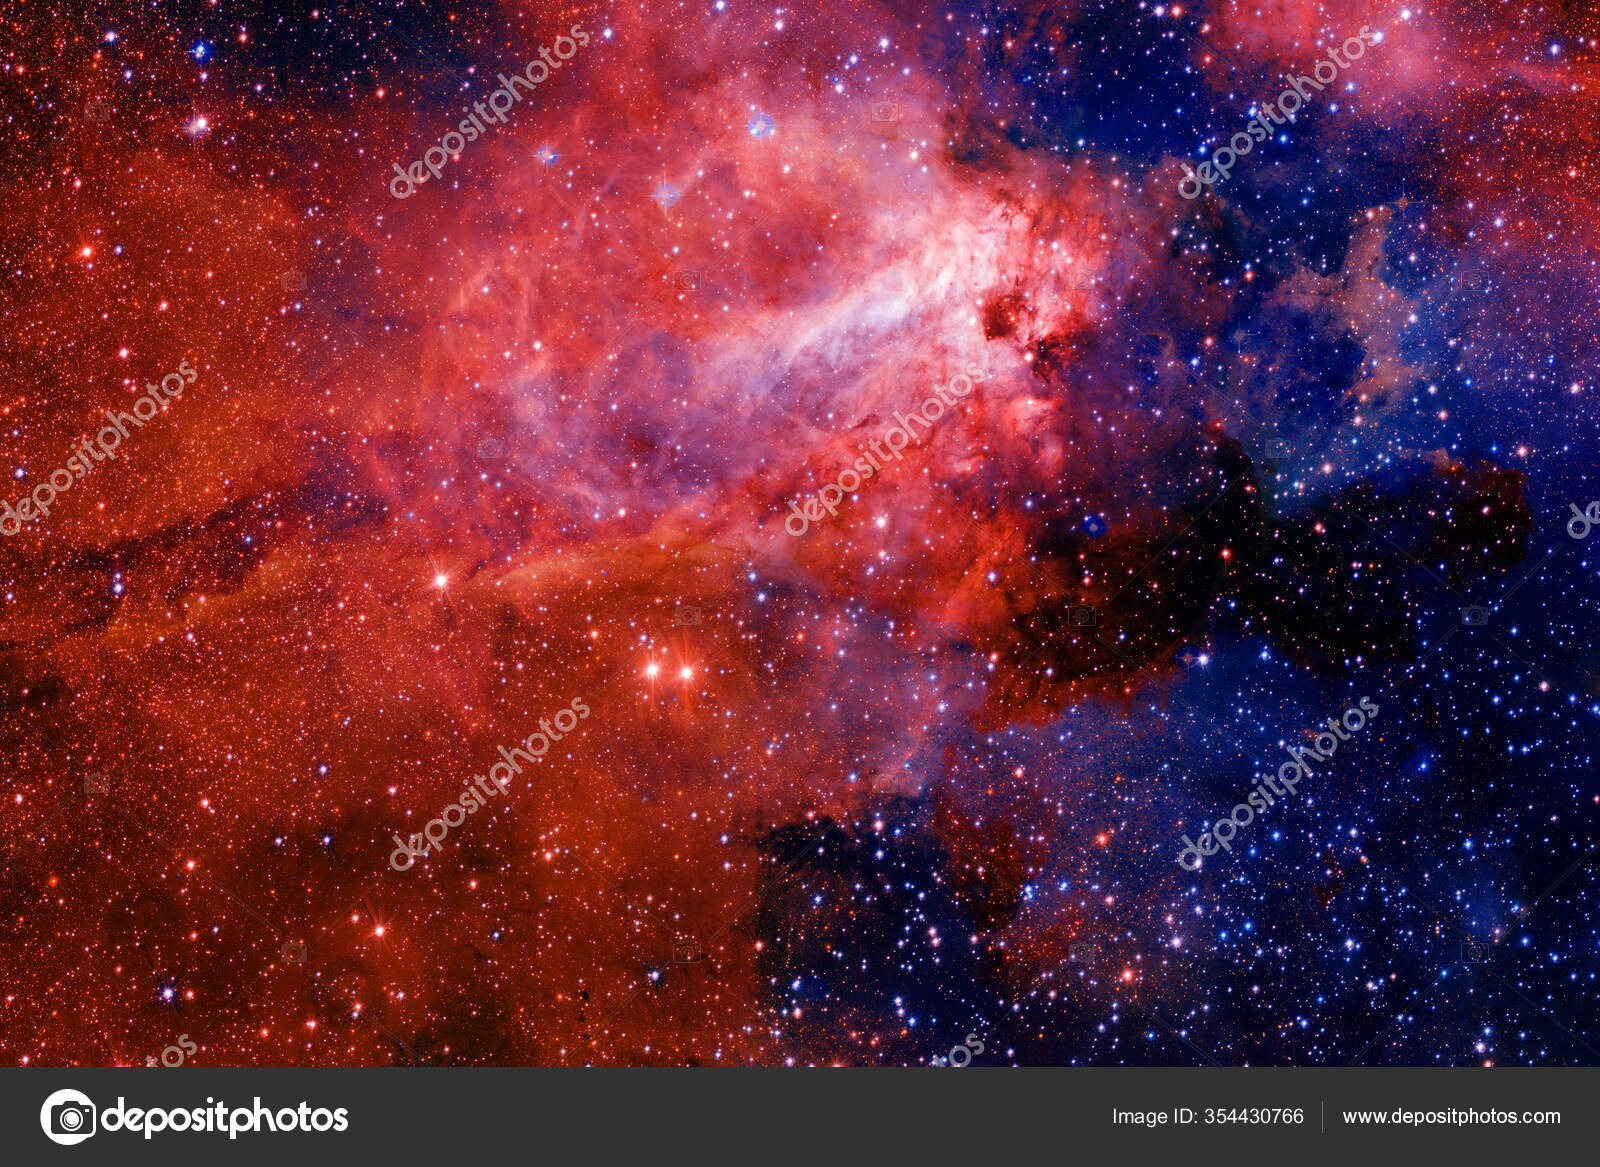 Beauty Endless Cosmos Science Fiction Wallpaper Elements Image Furnished Nasa Stock Photo C Outer Space